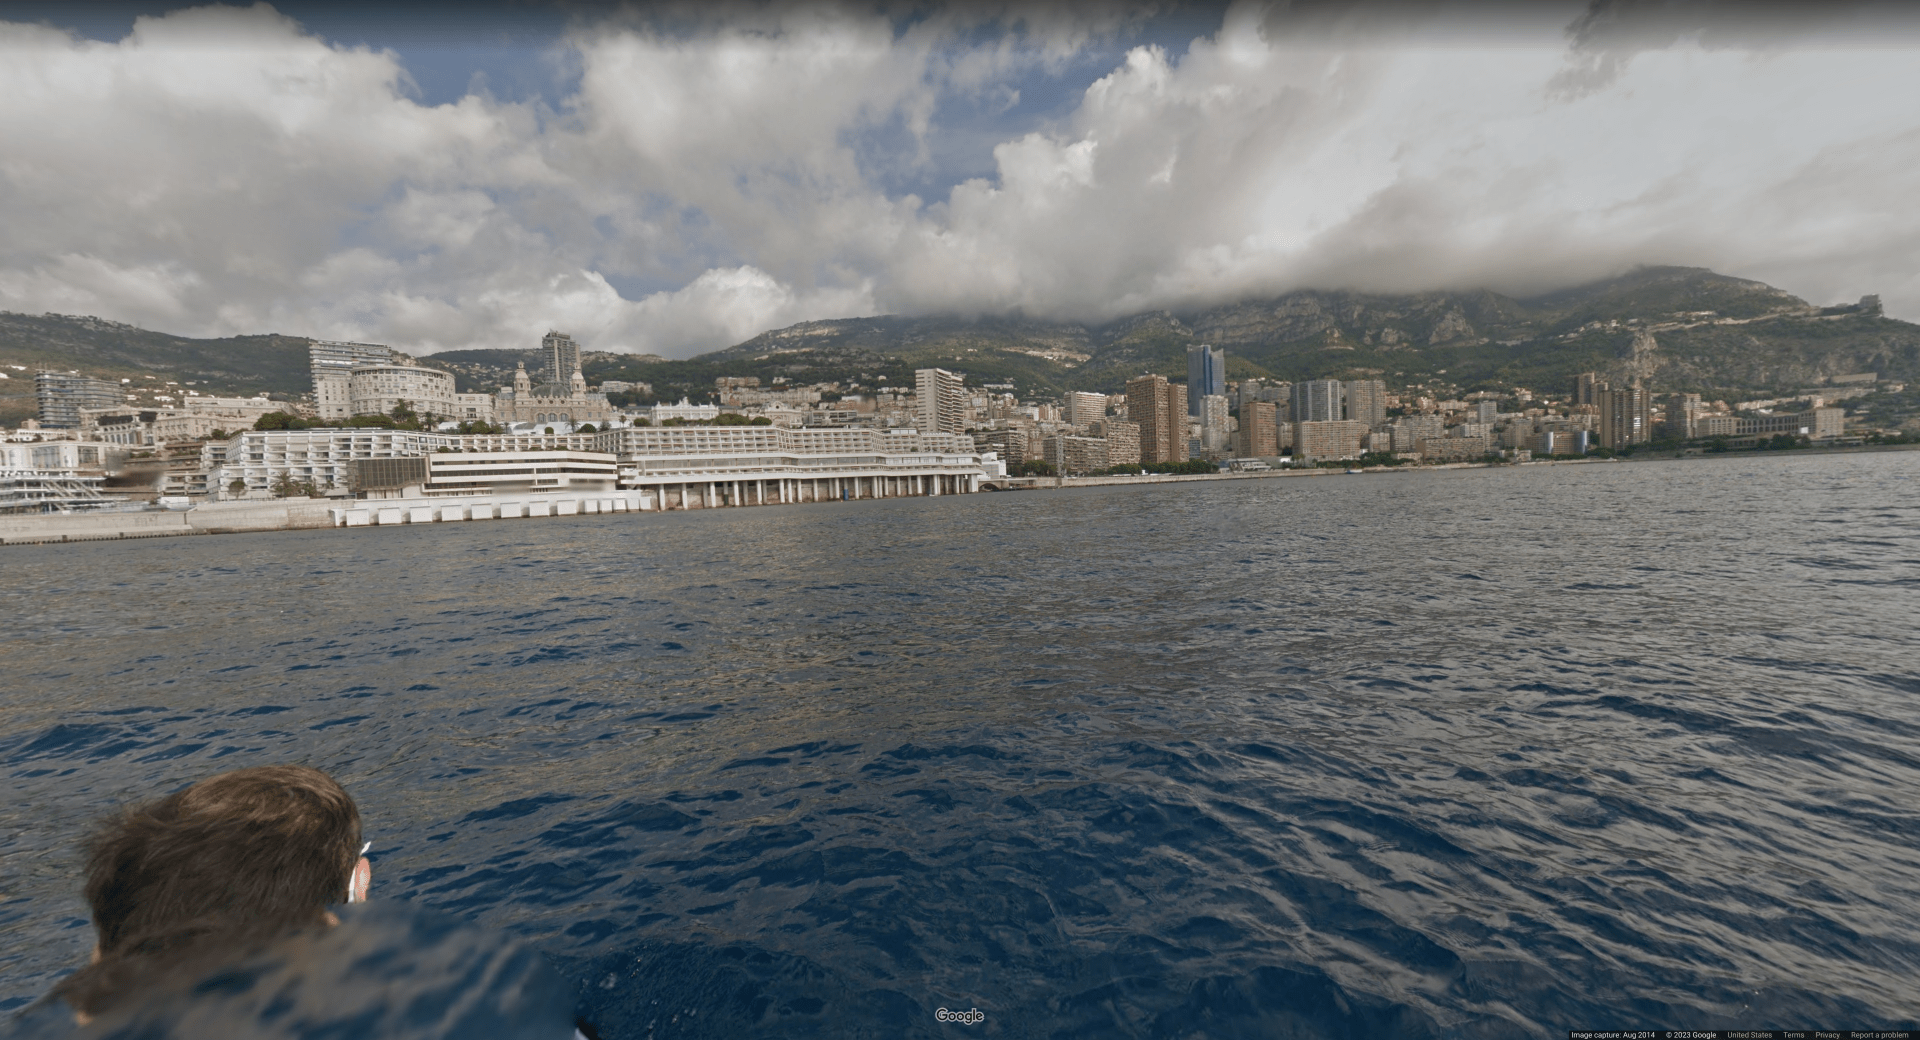 Picture taken in the water off the shore of a large city’s downtown area. The buildings are mostly white and there are hills in the background